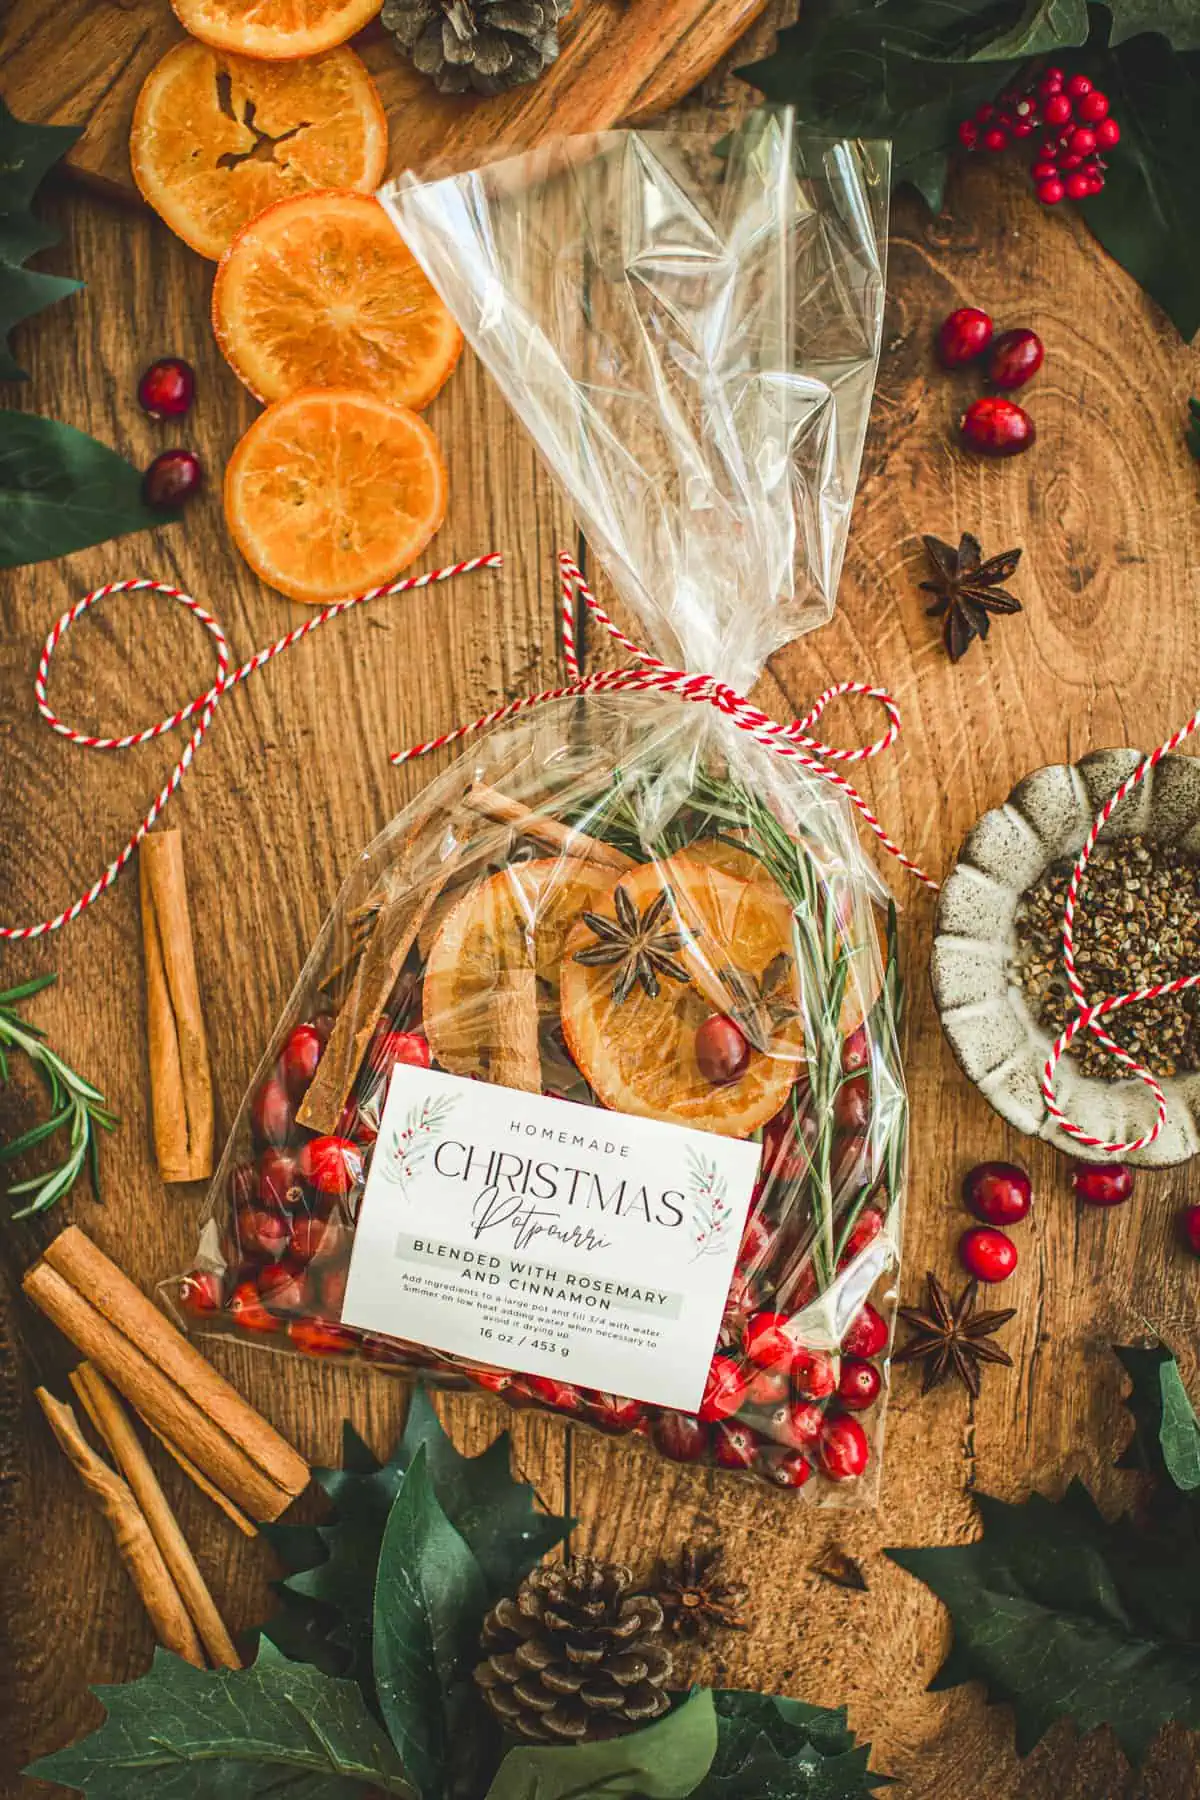 Christmas potpourri in a clear bag tied with bakers twine and with a homemade label.